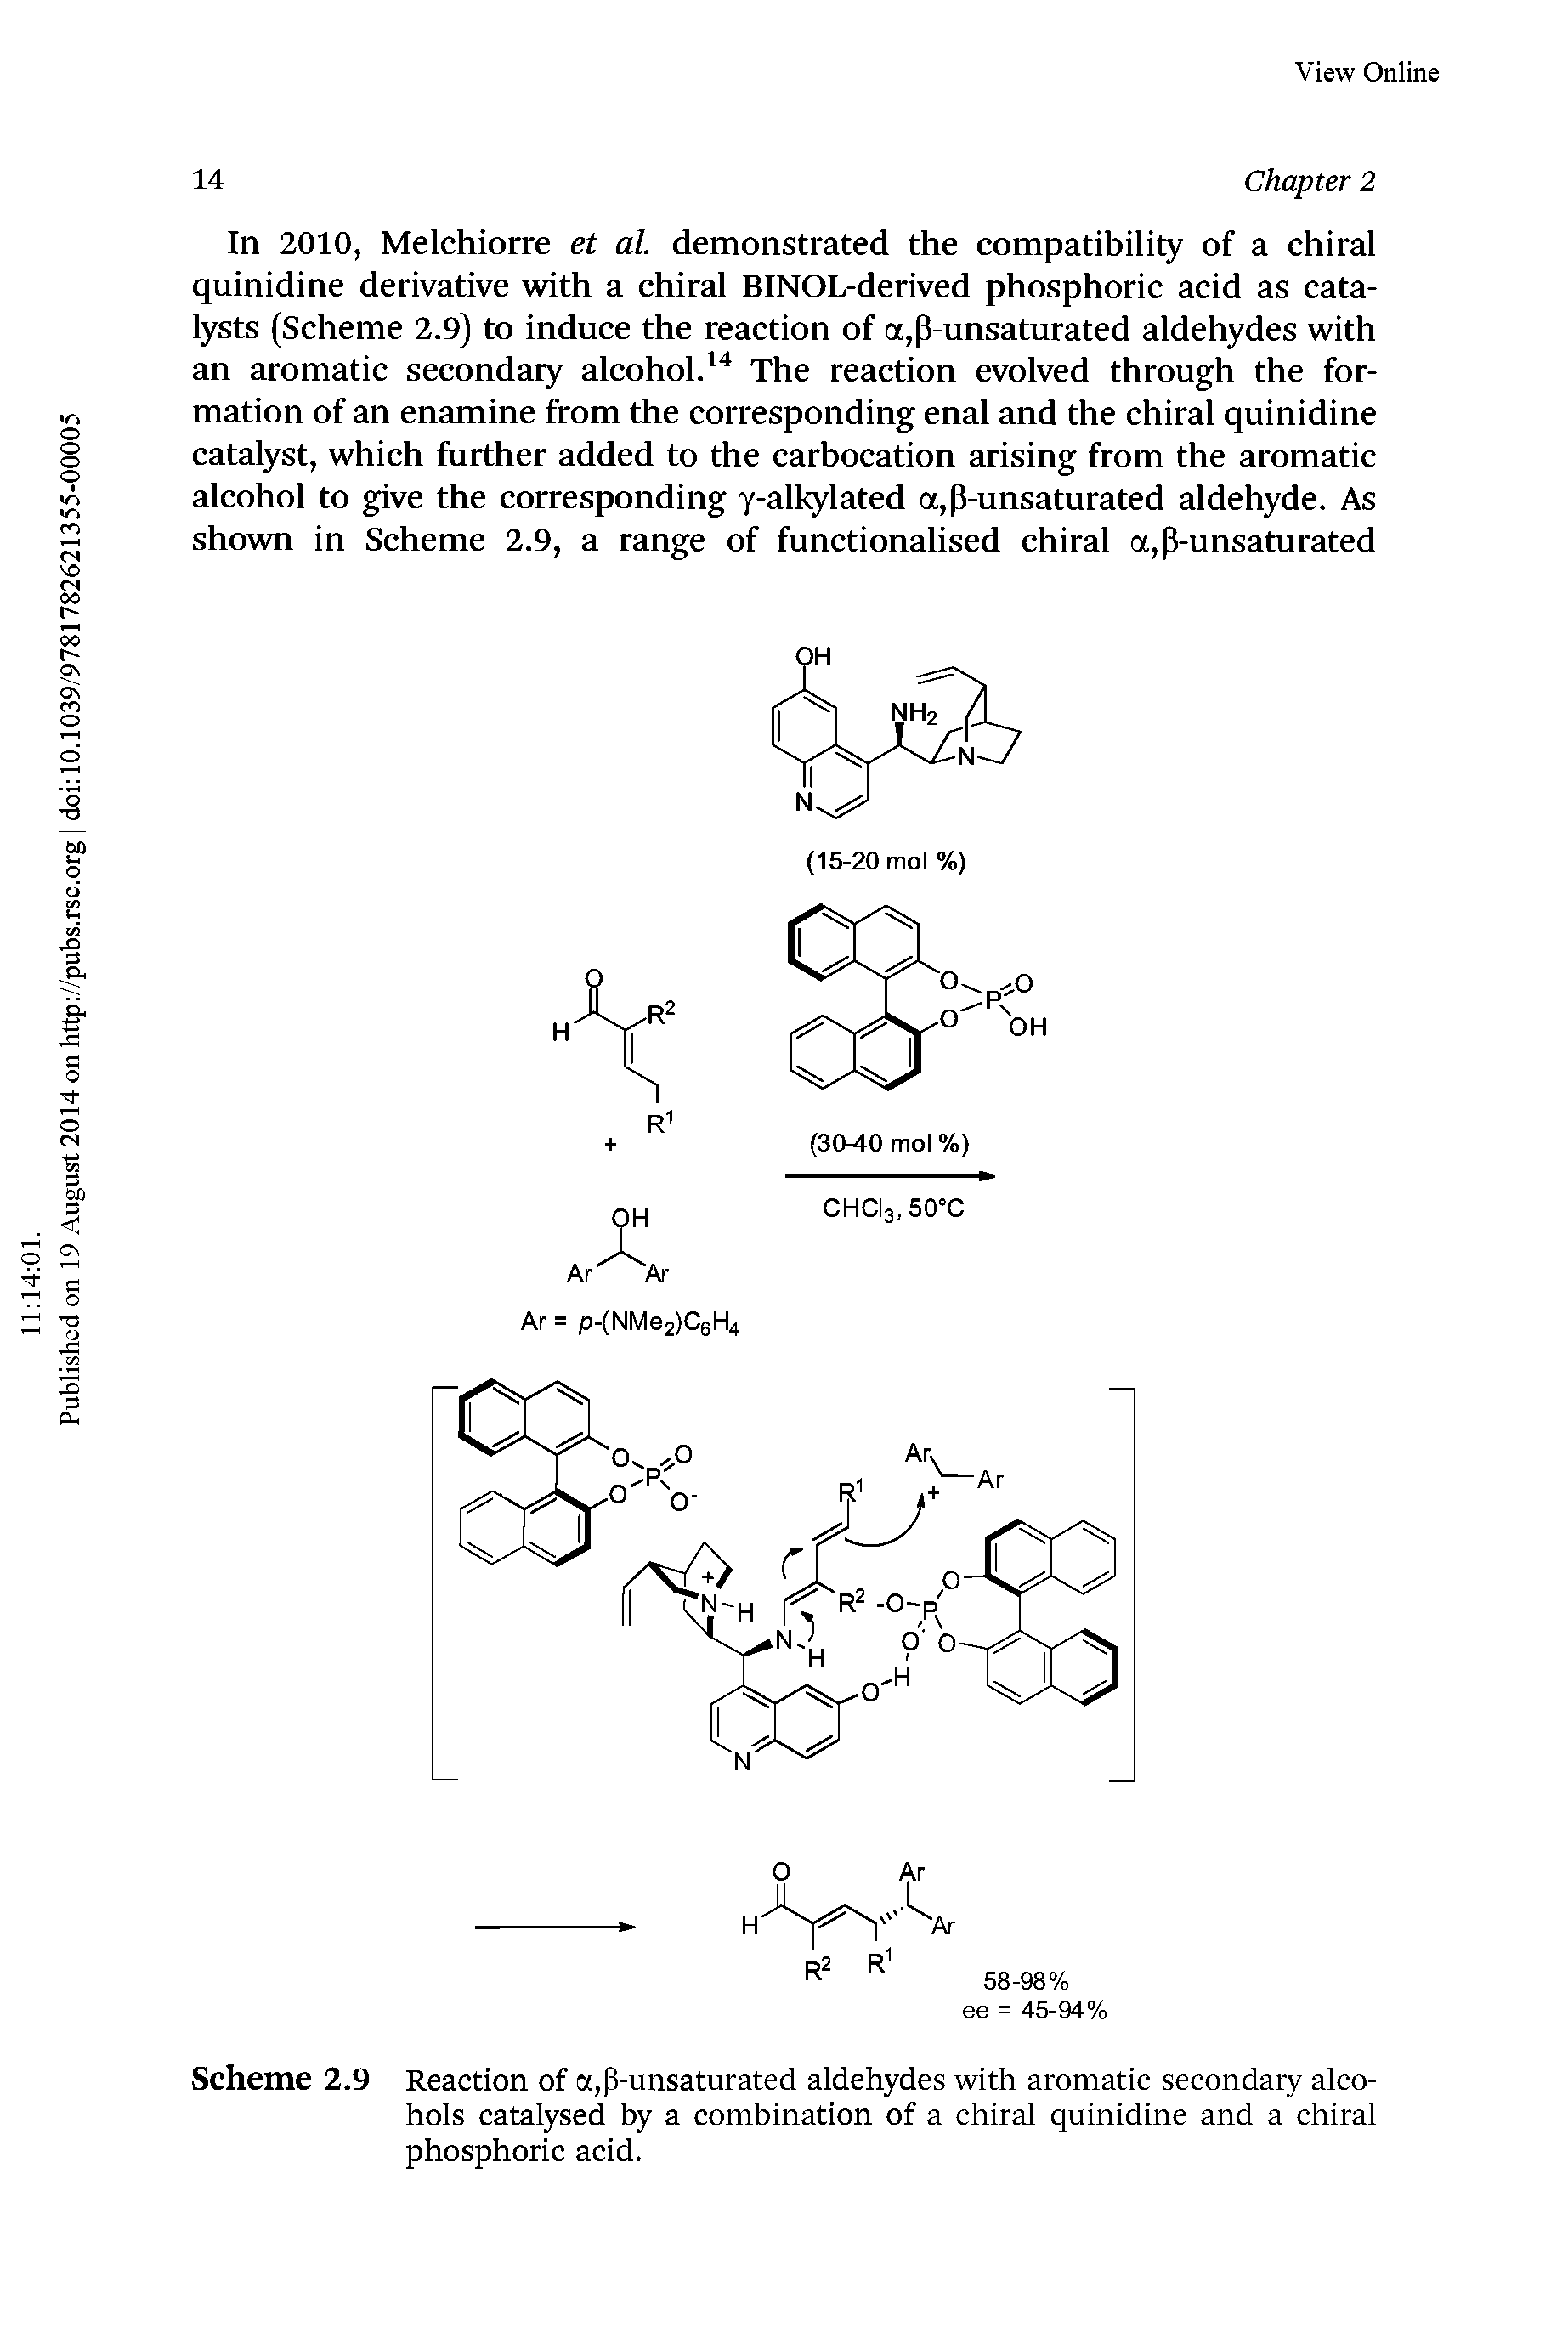 Scheme 2.9 Reaction of a,p-unsaturated aldehydes with aromatic secondary alcohols catalysed by a combination of a chiral quinidine and a chiral phosphoric acid.